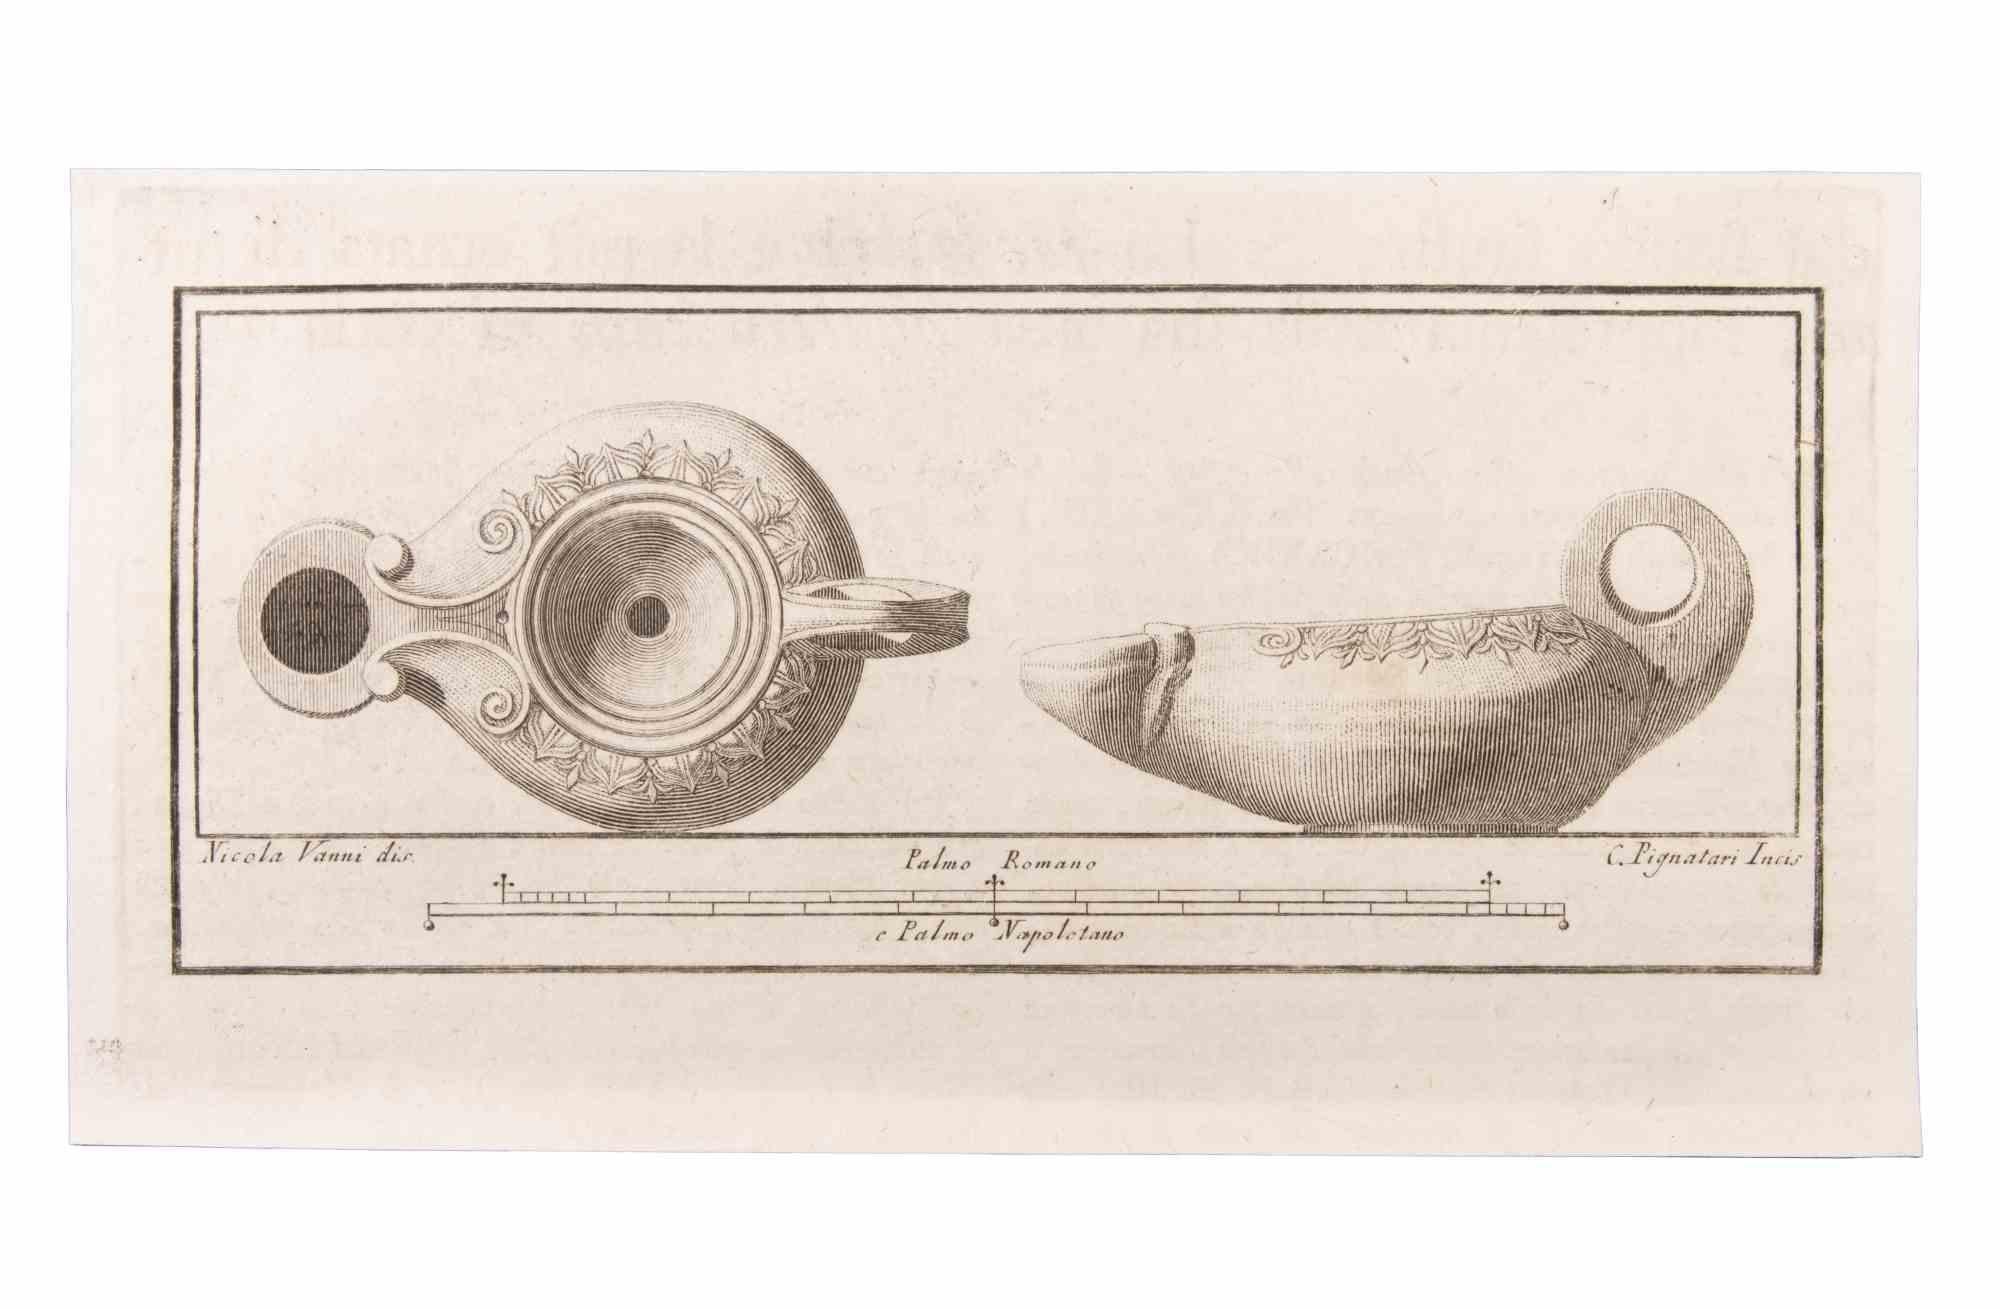 Oil Lamp With Decoration is an Etching realized by Carlo Pignatari (18th century).

The etching belongs to the print suite “Antiquities of Herculaneum Exposed” (original title: “Le Antichità di Ercolano Esposte”), an eight-volume volume of